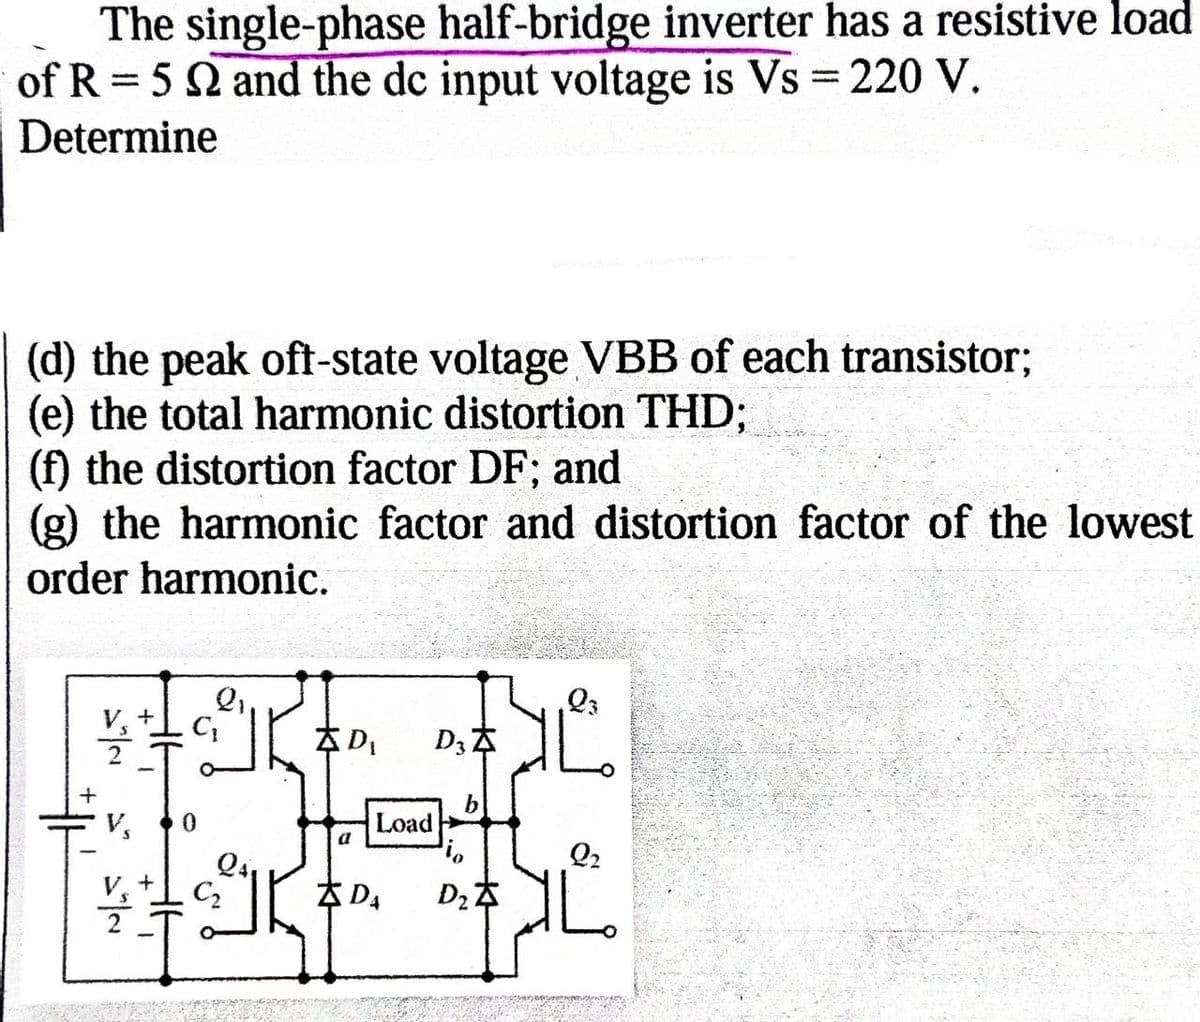 The single-phase half-bridge inverter has a resistive load
of R 52 and the dc input voltage is Vs = 220 V.
-
Determine
(d) the peak oft-state voltage VBB of each transistor;
(e) the total harmonic distortion THD;
(f) the distortion factor DF; and
(g) the harmonic factor and distortion factor of the lowest
order harmonic.
23
+
D₁
D3Z
0
Load
а
io
Q2
Q41
+
C₂
ZDA
D₂